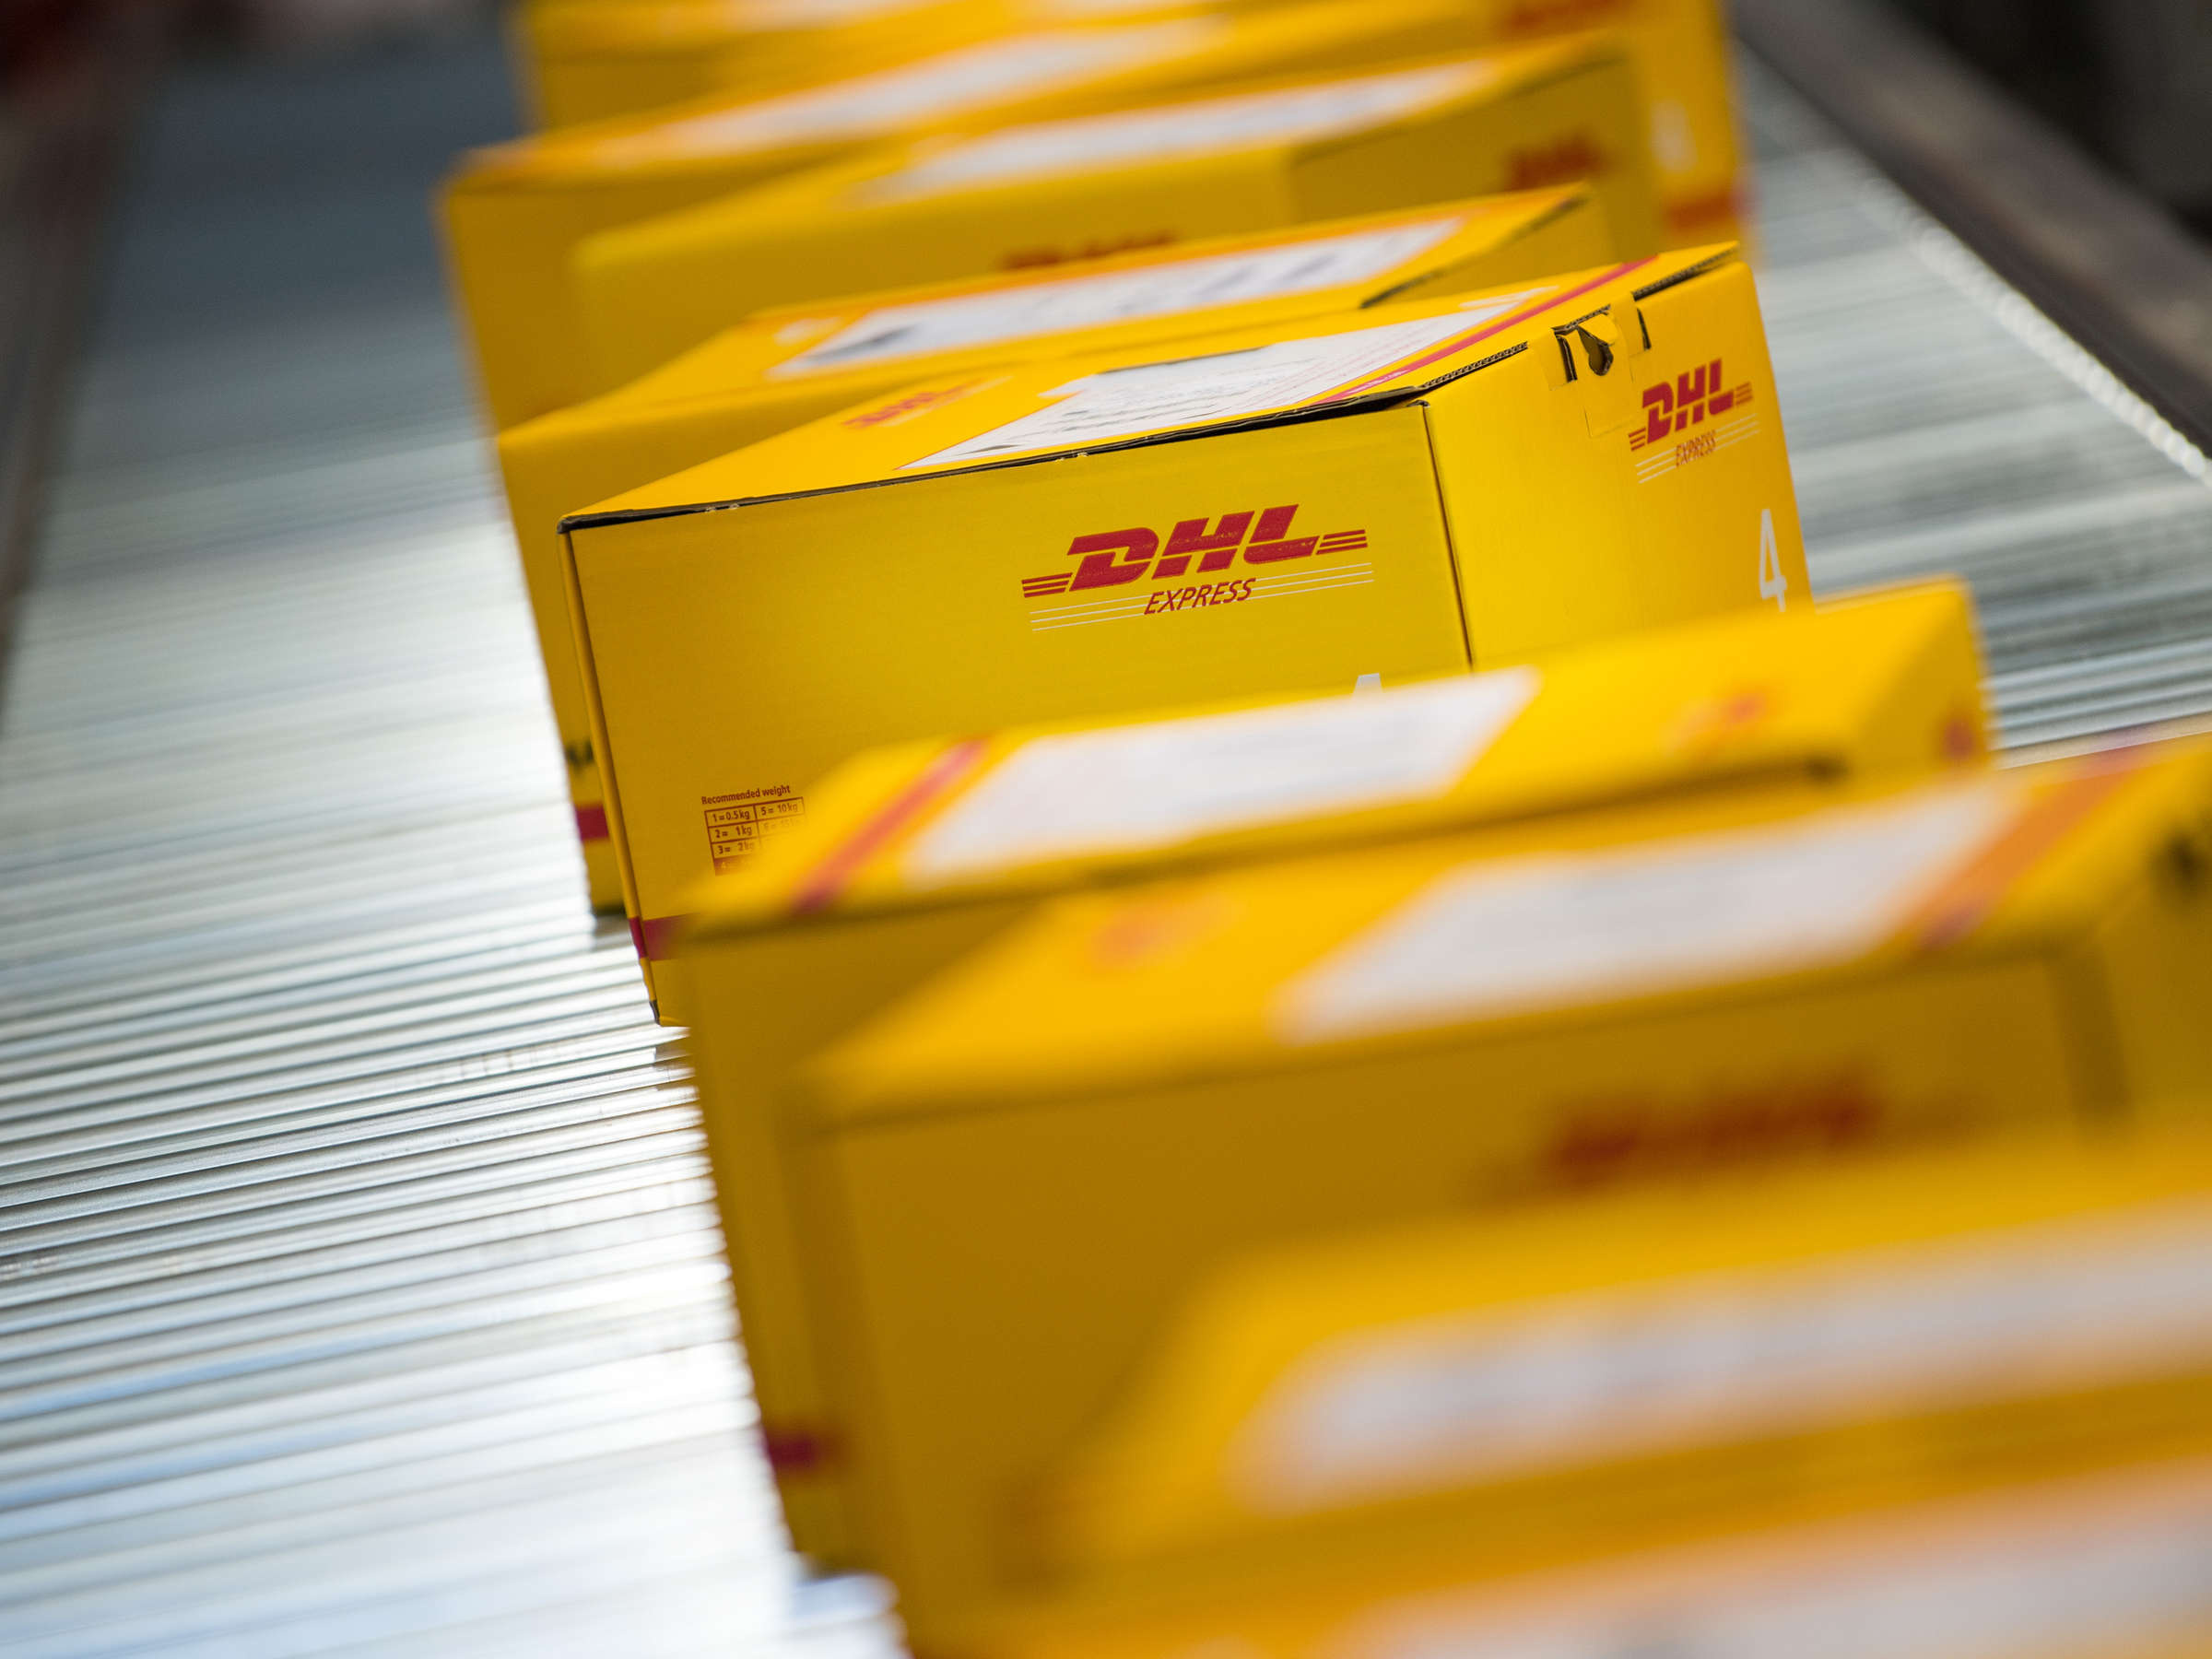 DHL: A great cross-border shipping service for eCommerce and online shops. 2400x1800 HD Wallpaper.